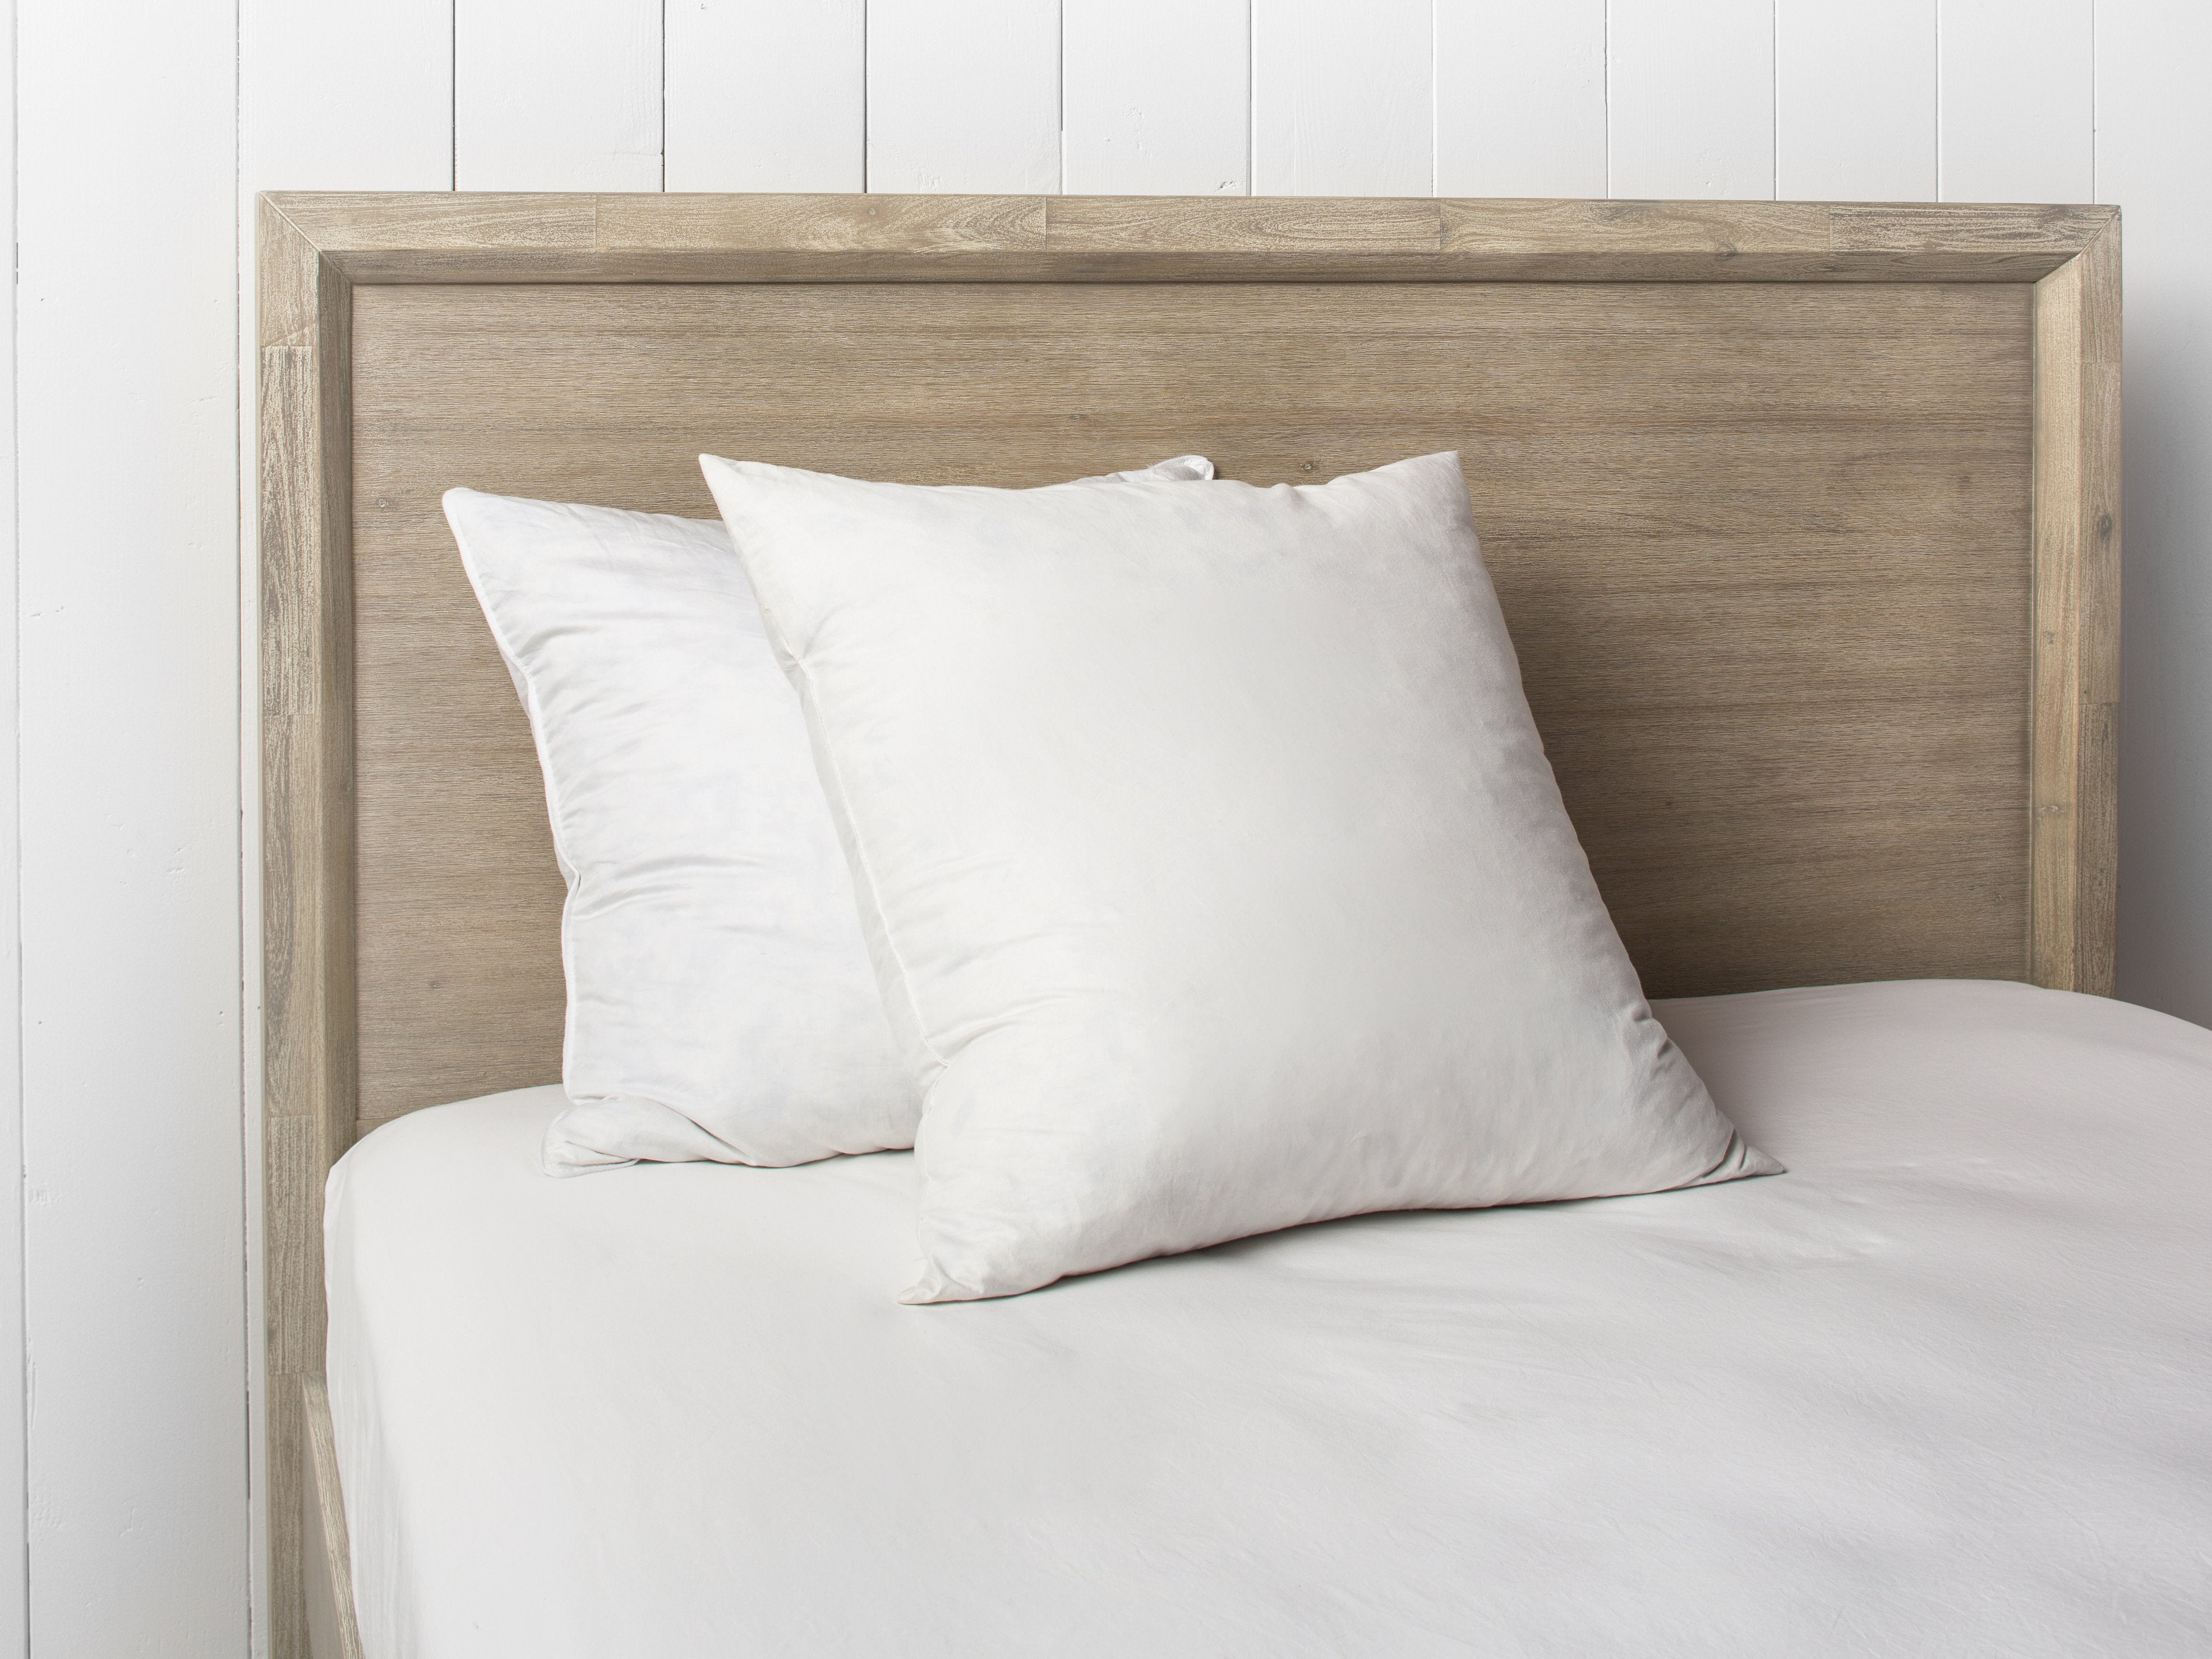 Two square white pillows on a bed